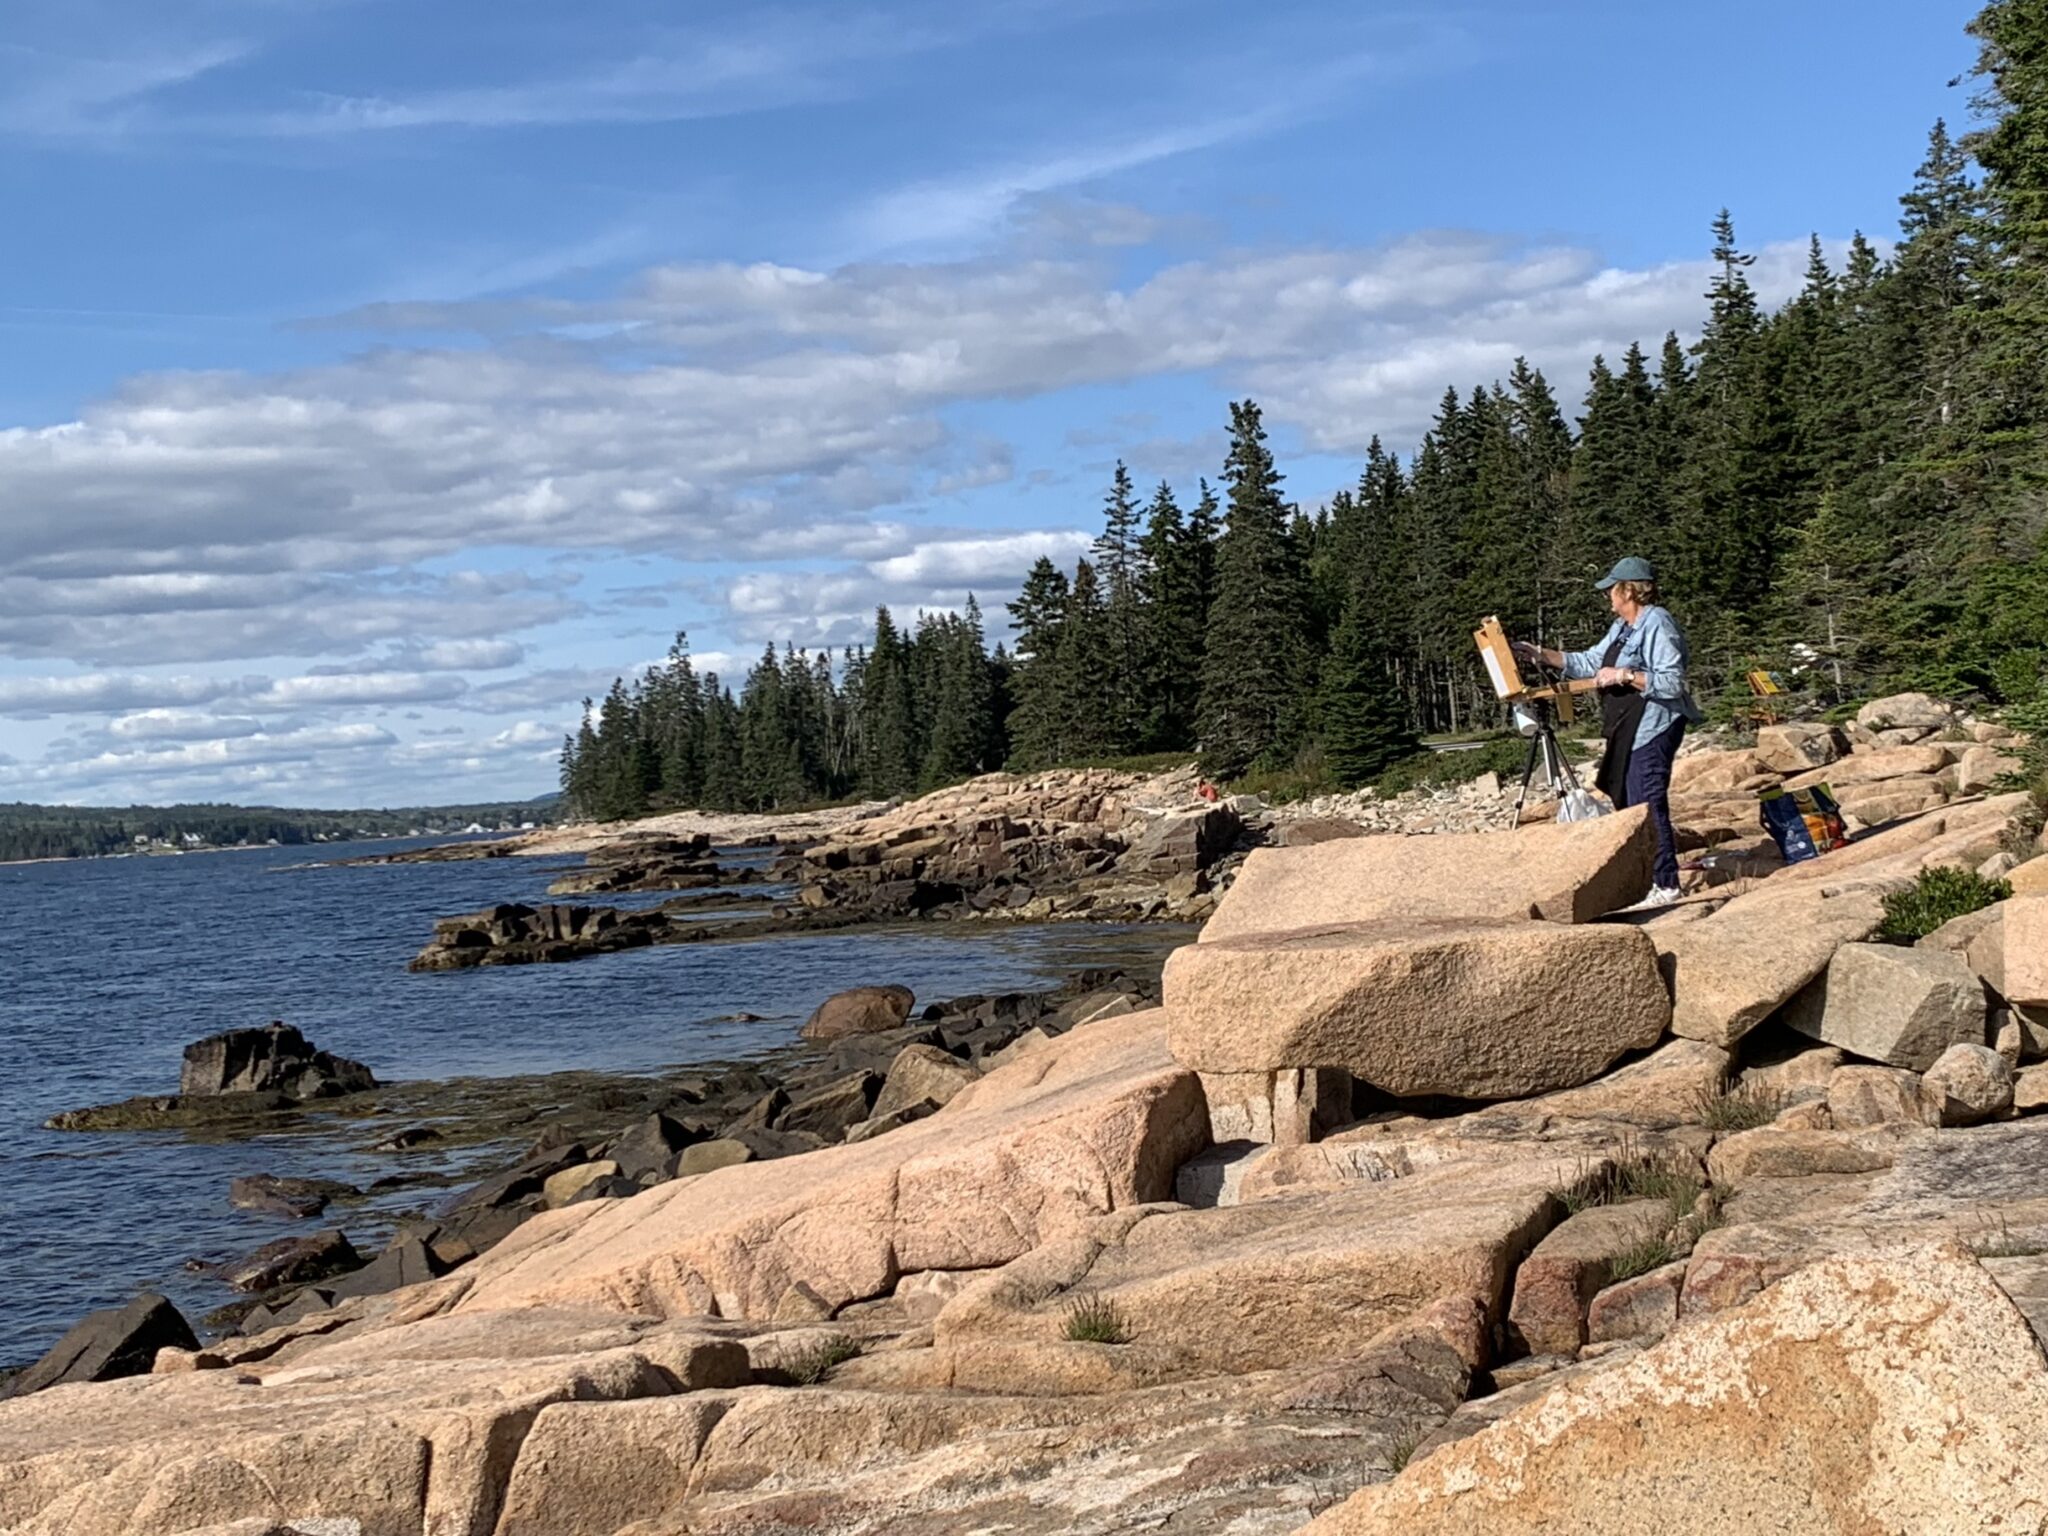 A painter stands in front of an easel stationed on the rocks along the Schoodic Peninsula coastline, while facing the open ocean and painting the scene.